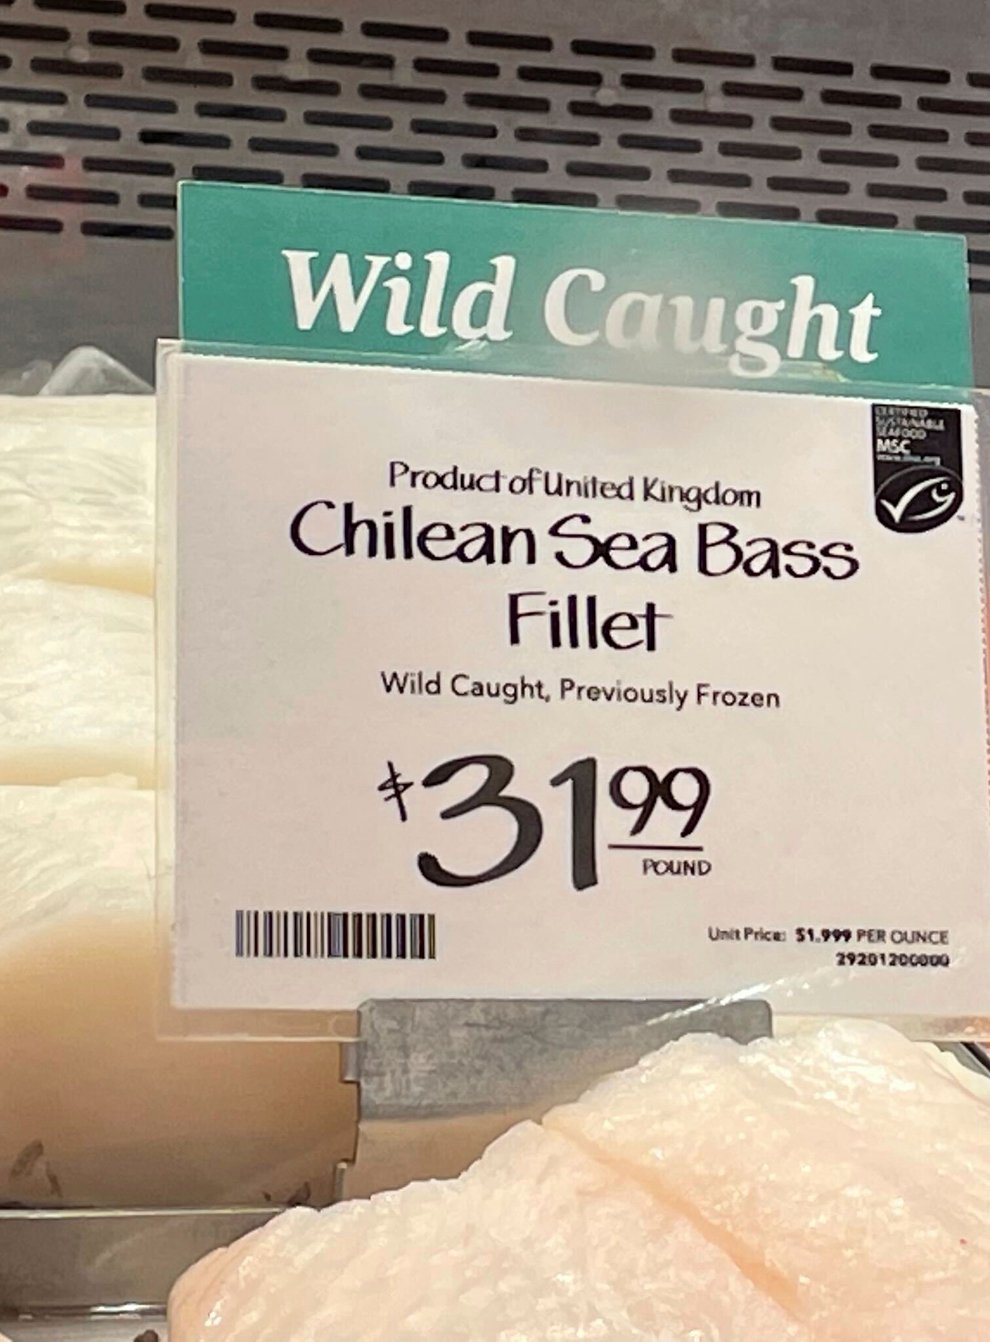 Fillets of Chilean sea bass caught near the UK-controlled South Georgia island are displayed for sale at a Whole Foods Market in Cleveland, Ohio on June 17 2022 (Joshua Goodman/AP)